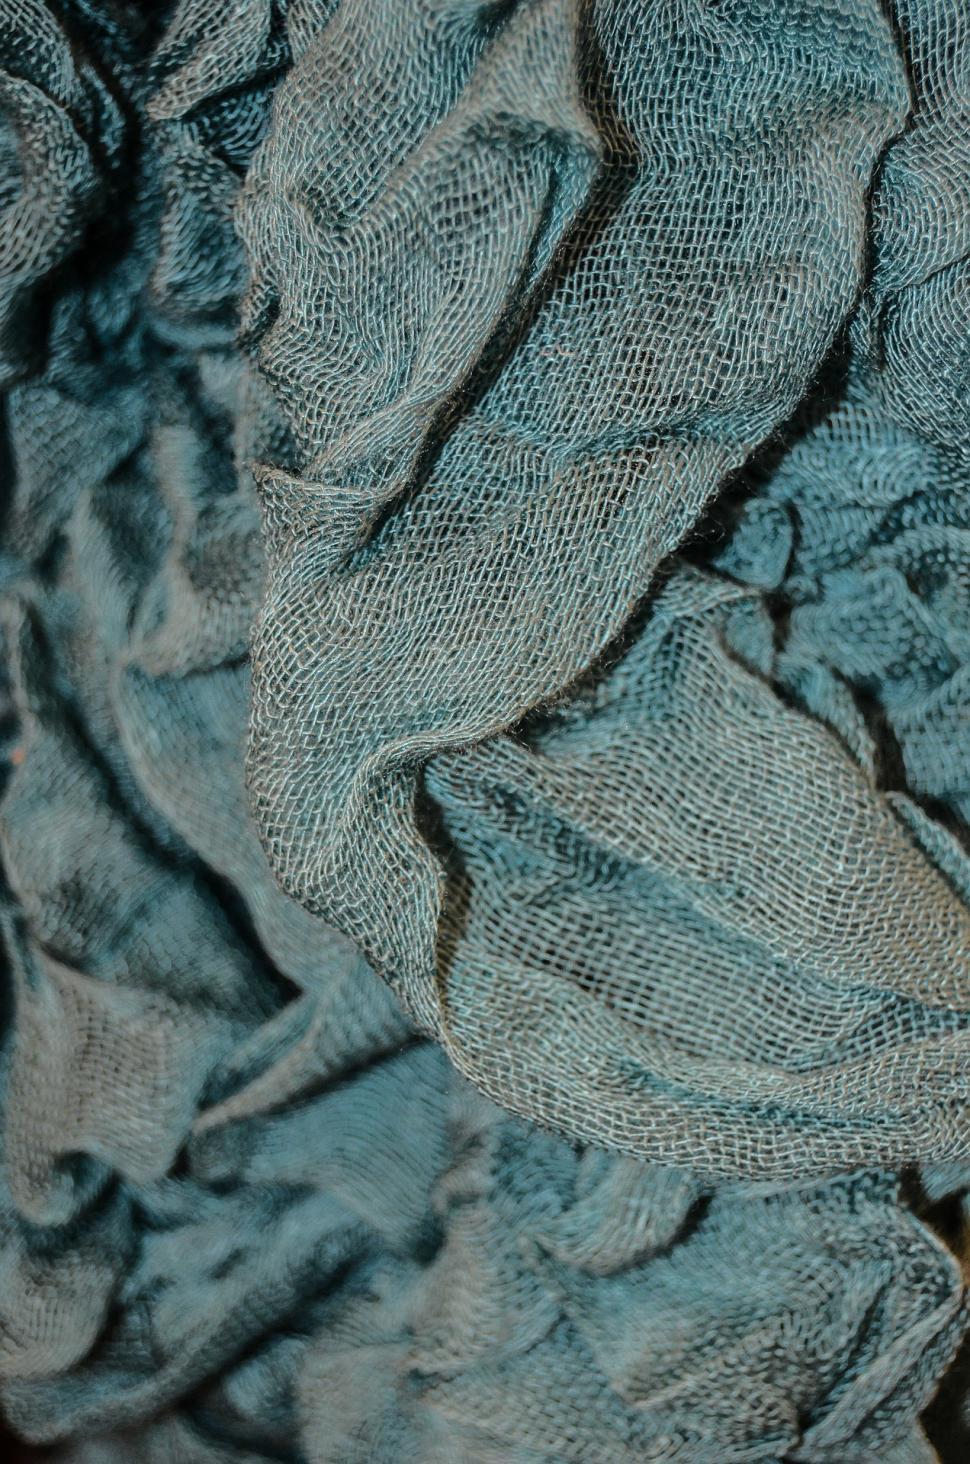 Free Image of Close Up of a Piece of Cloth 